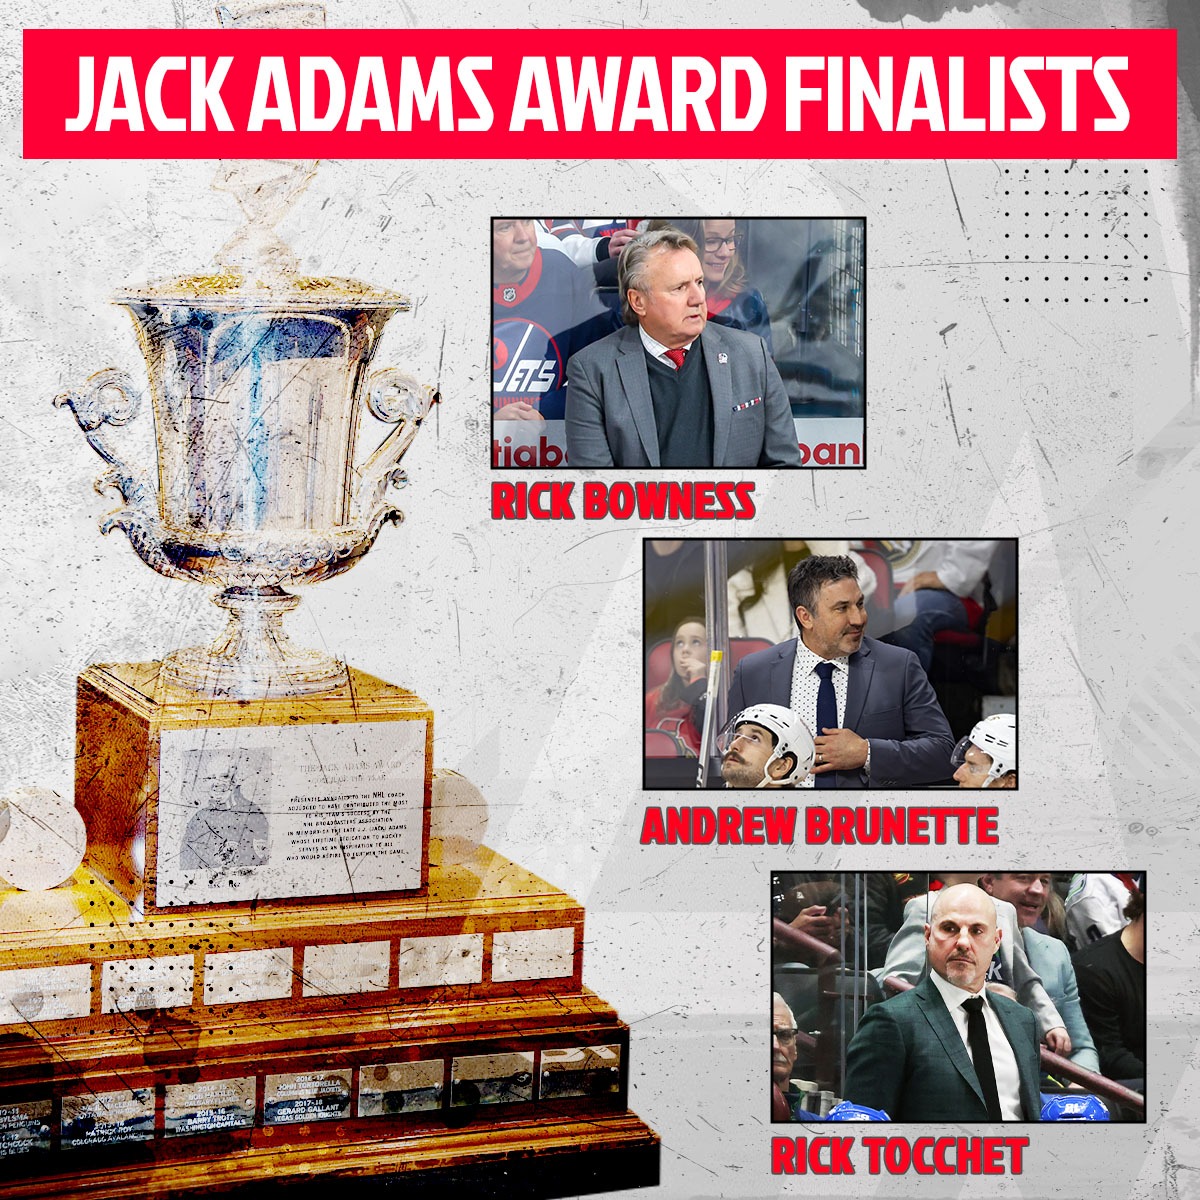 Who is your pick to win the Jack Adams Award?